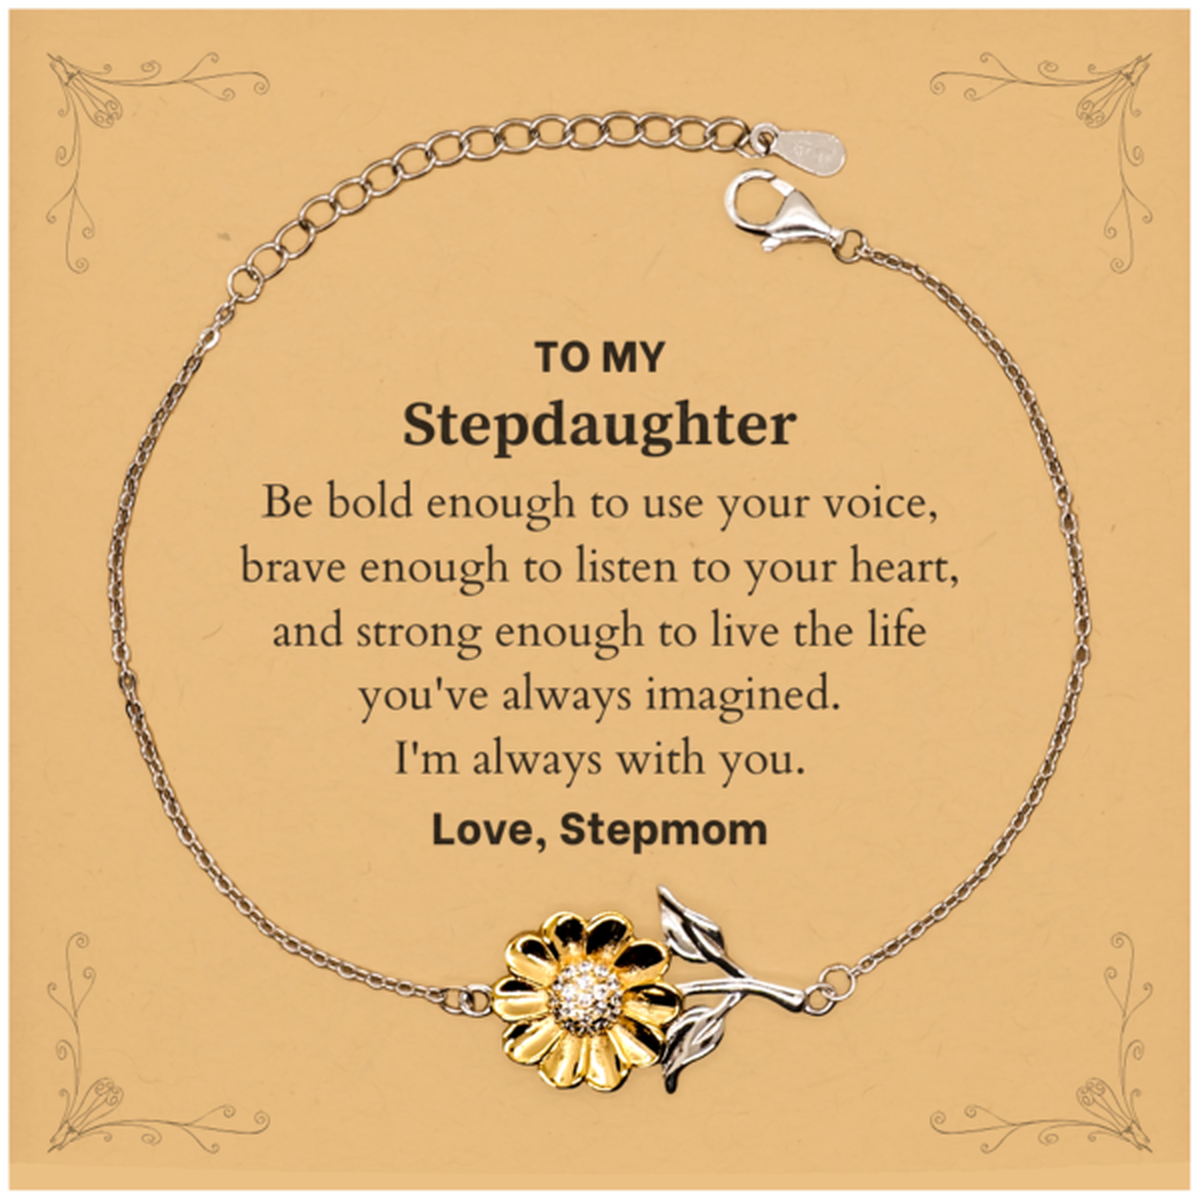 Keepsake Stepdaughter Sunflower Bracelet Gift Idea Graduation Christmas Birthday Stepdaughter from Stepmom, Stepdaughter Be bold enough to use your voice, brave enough to listen to your heart. Love, Stepmom